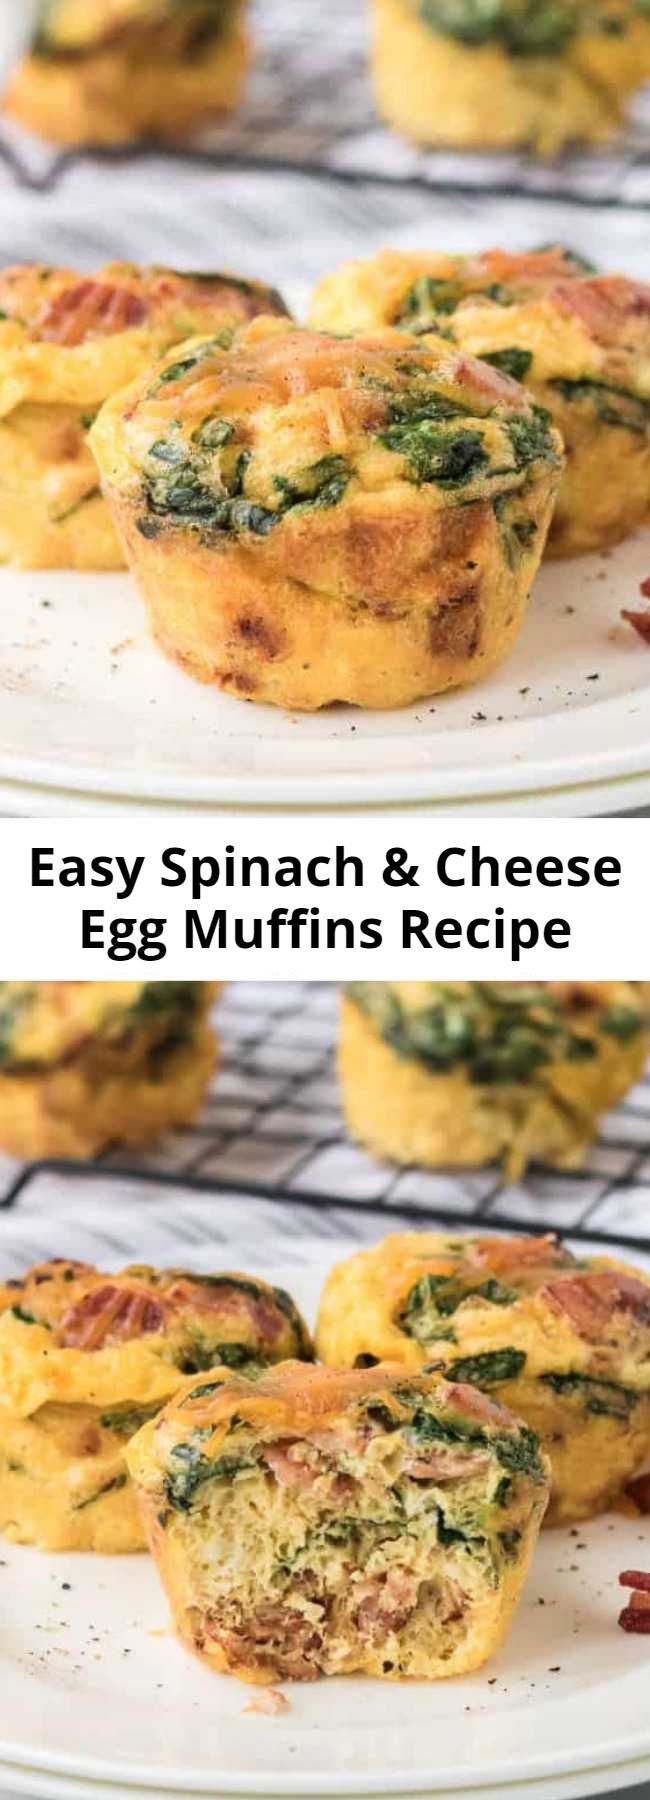 Easy Spinach & Cheese Egg Muffins Recipe – Mom Secret Ingrediets